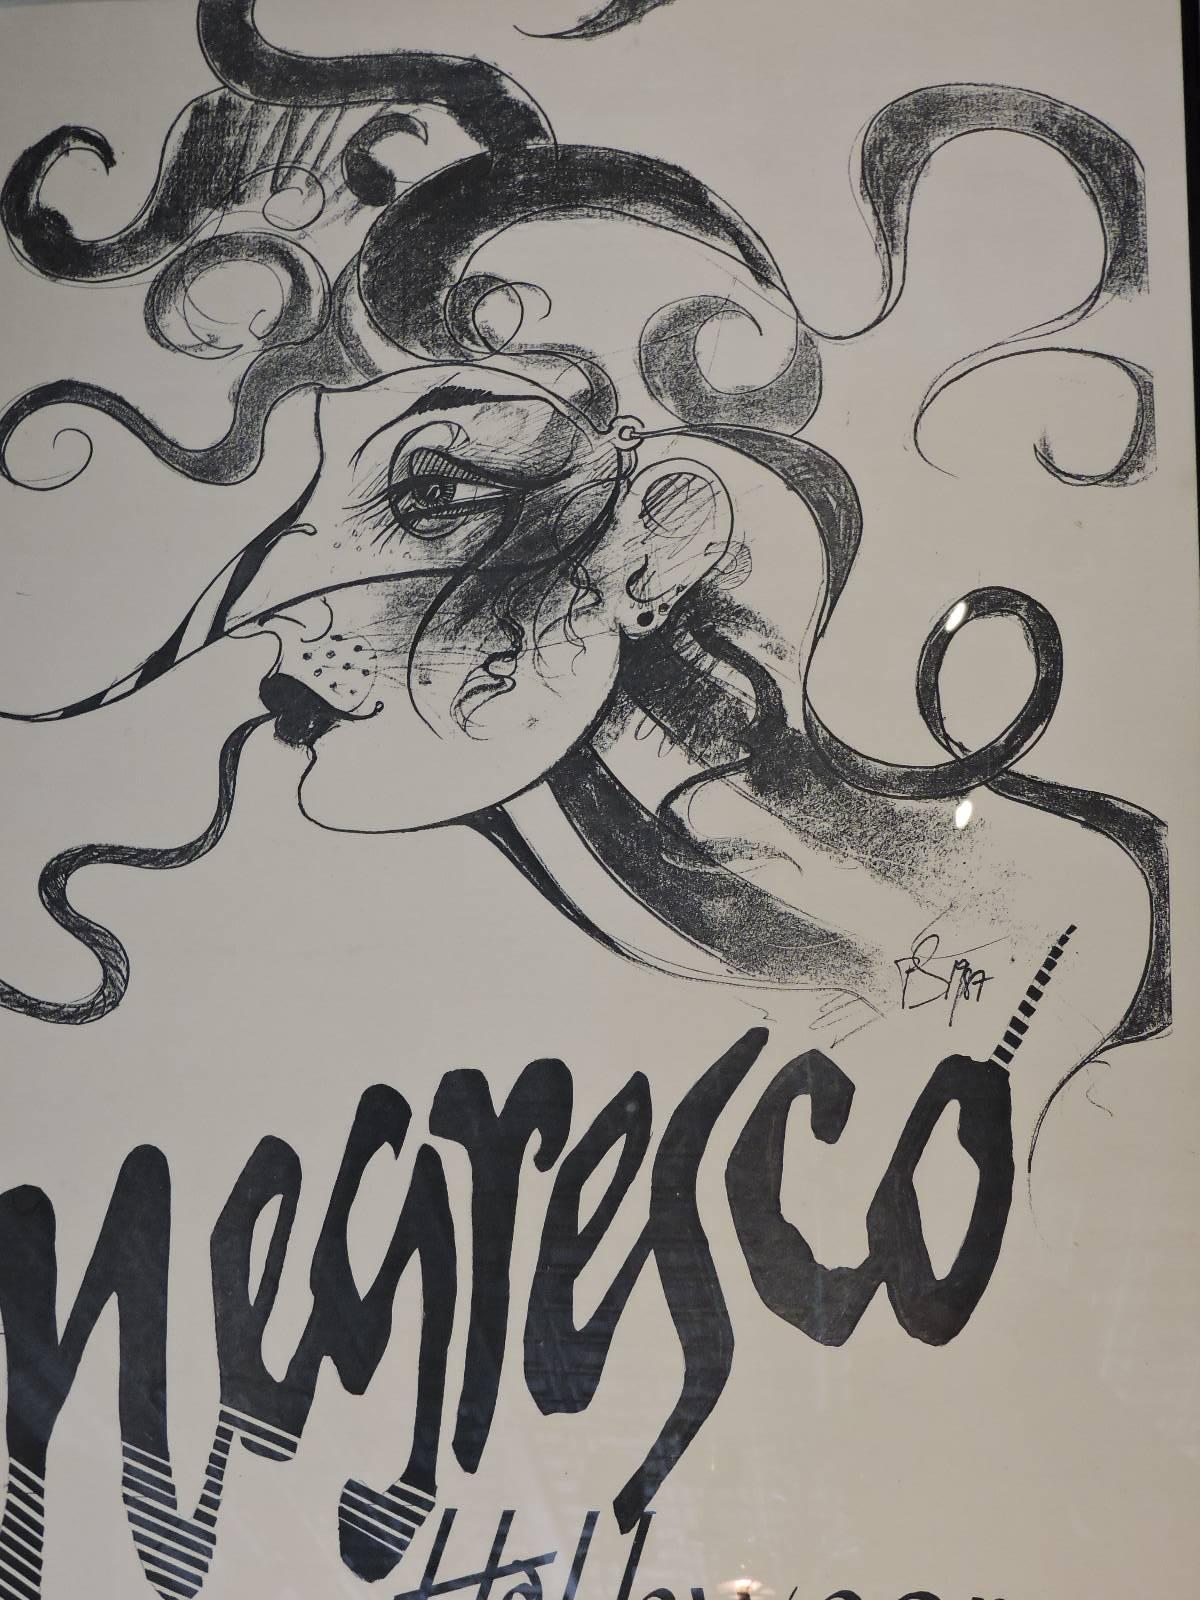 A hard to find lithograph poster by Ramon Santiago (signed RS 1987) titled - Negresco - Halloween Party - best costume - dinner for two -Saturday 0ct 31st - 814 S. Clinton Ave.   Overall very good clean crisp vintage condition with an area of paper